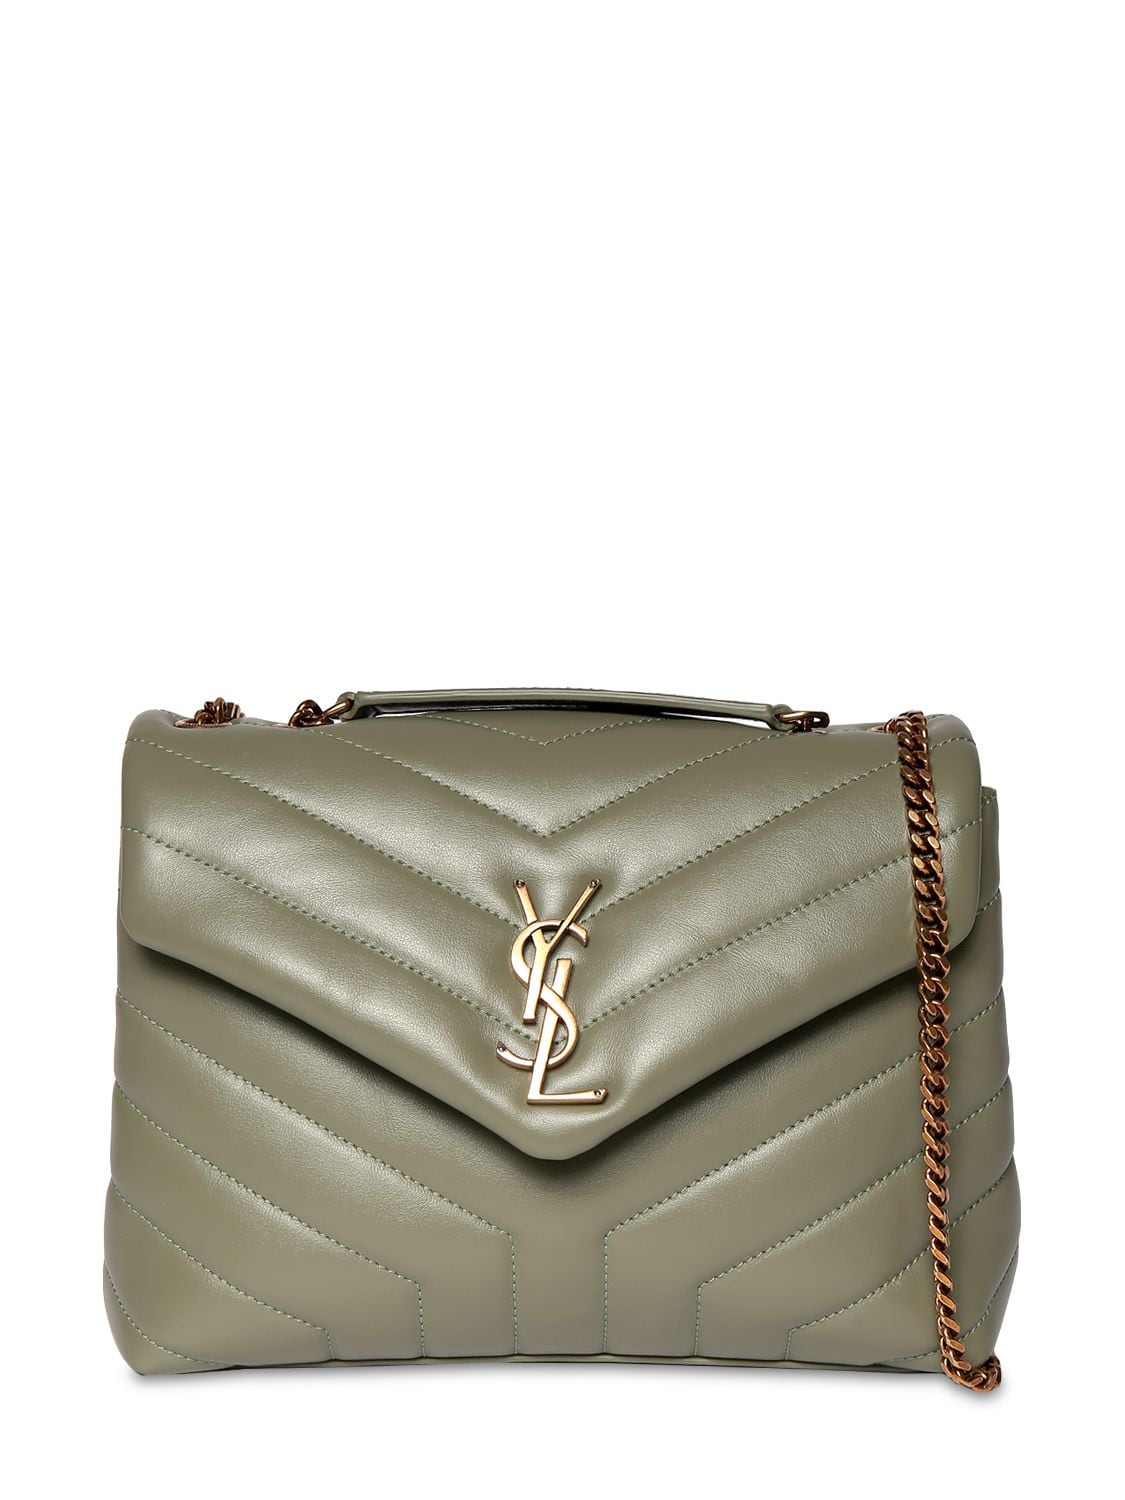 SAINT LAURENT Small Loulou Puffer Leather Bag